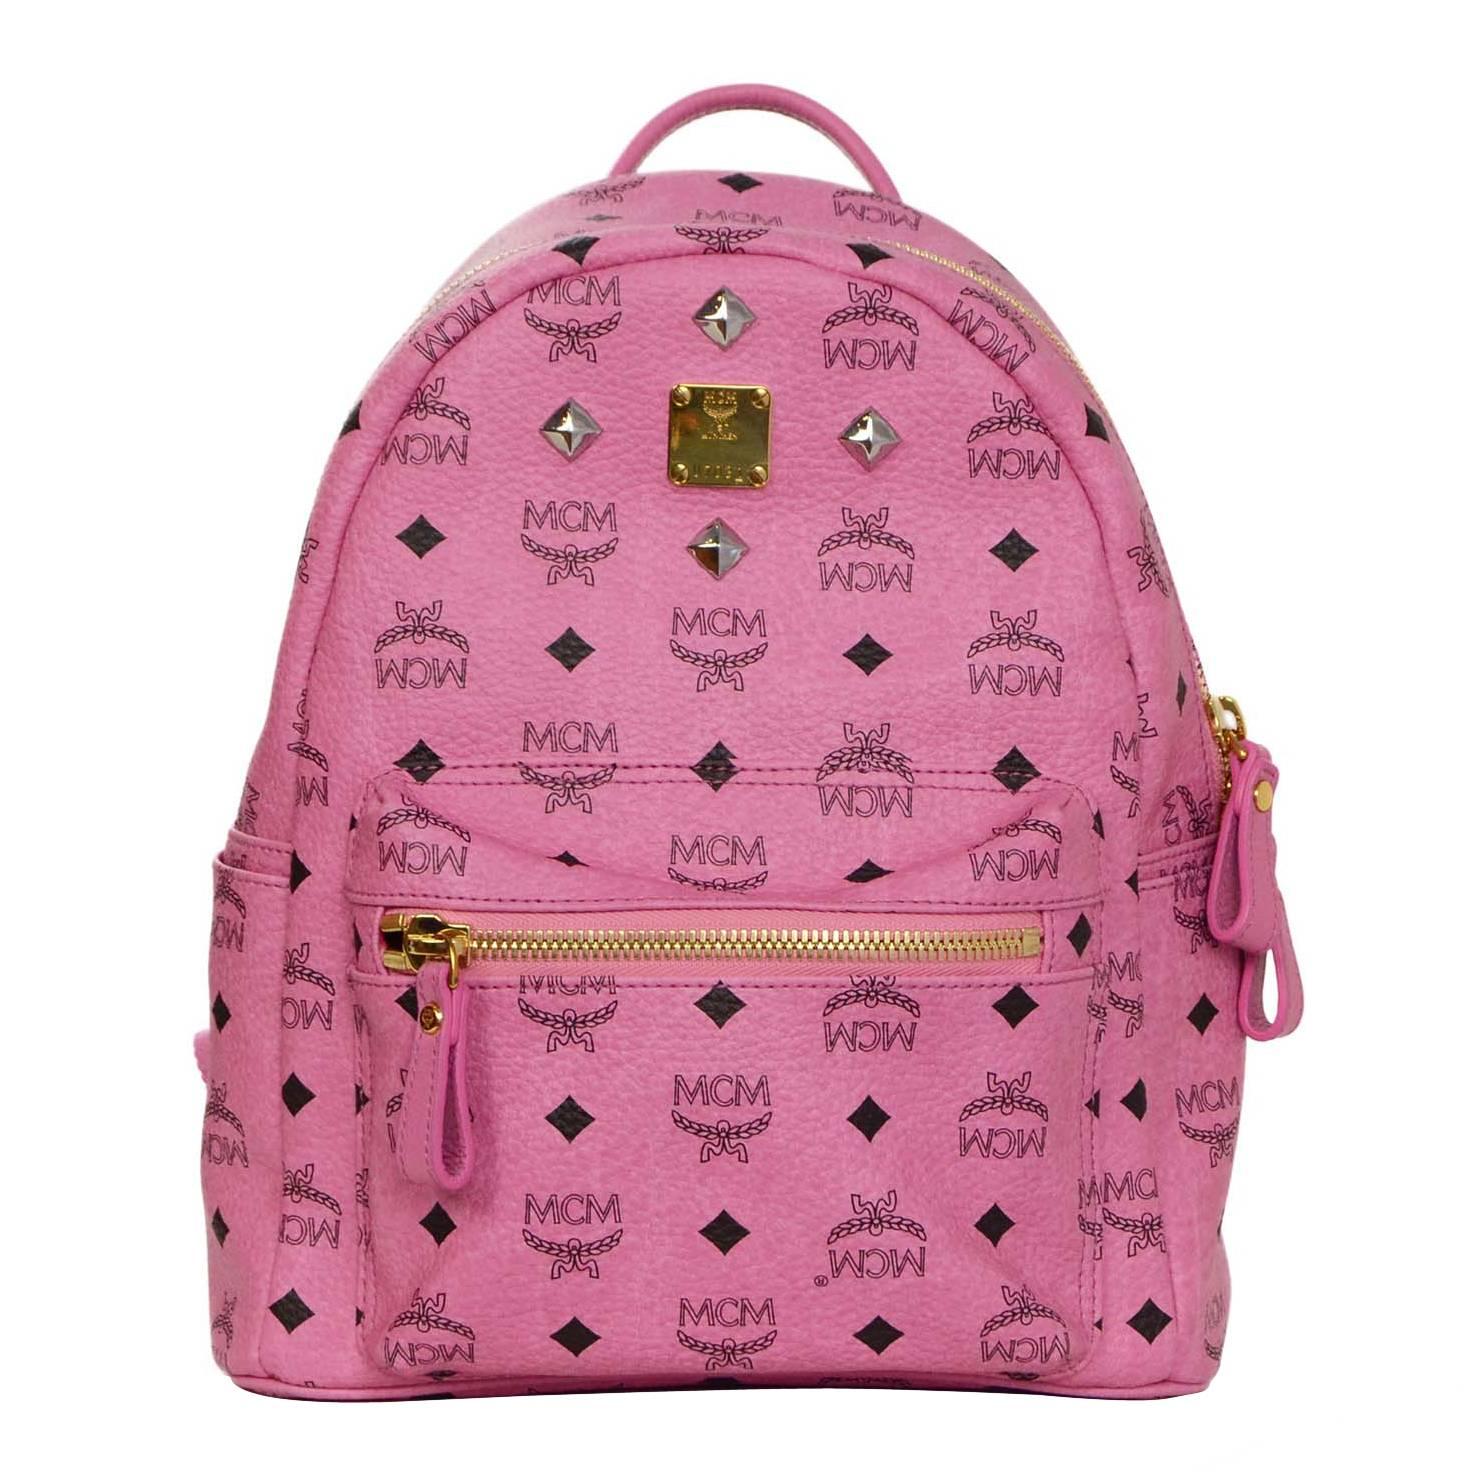 MCM Pink Leather Studded Backpack GHW